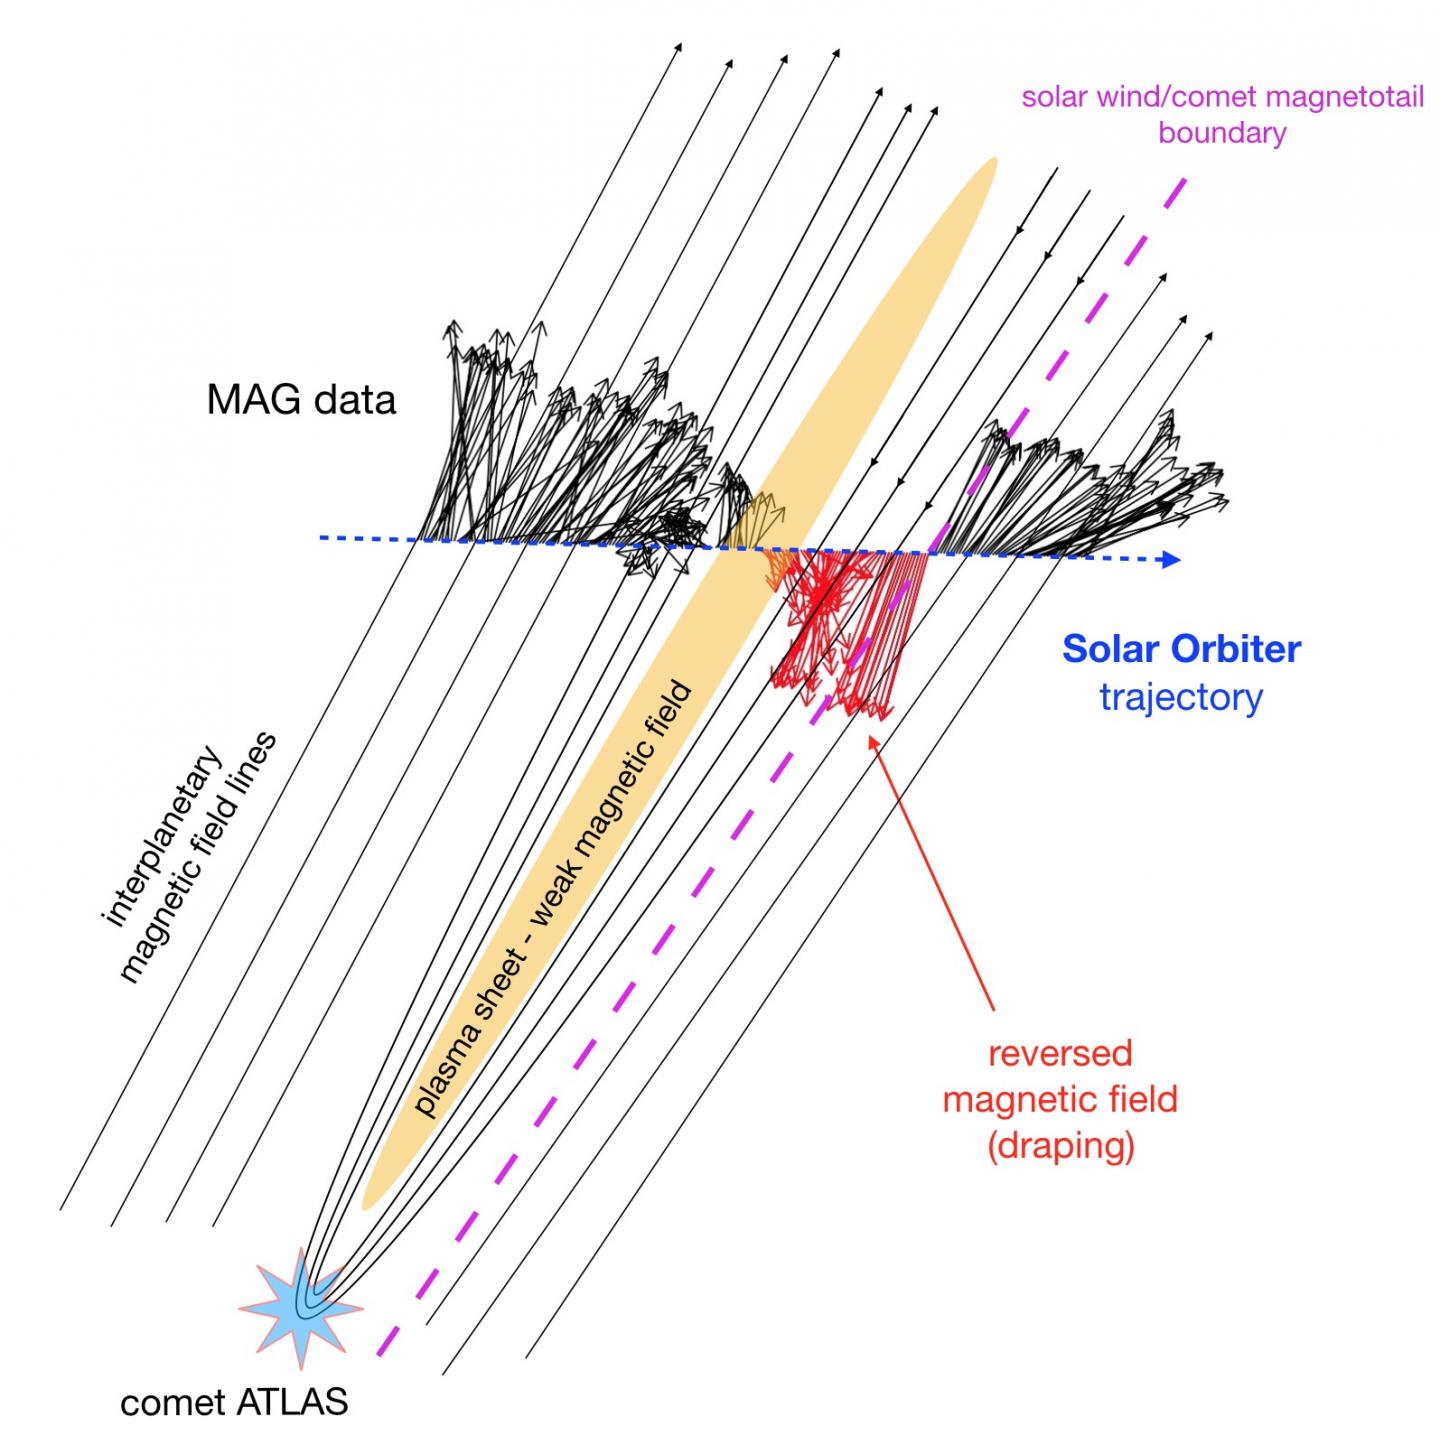 Schematic reconstruction of a Solar Orbiter encounter with the ion gas tail from fragmented comet C/2019 Y4 (ATLAS).